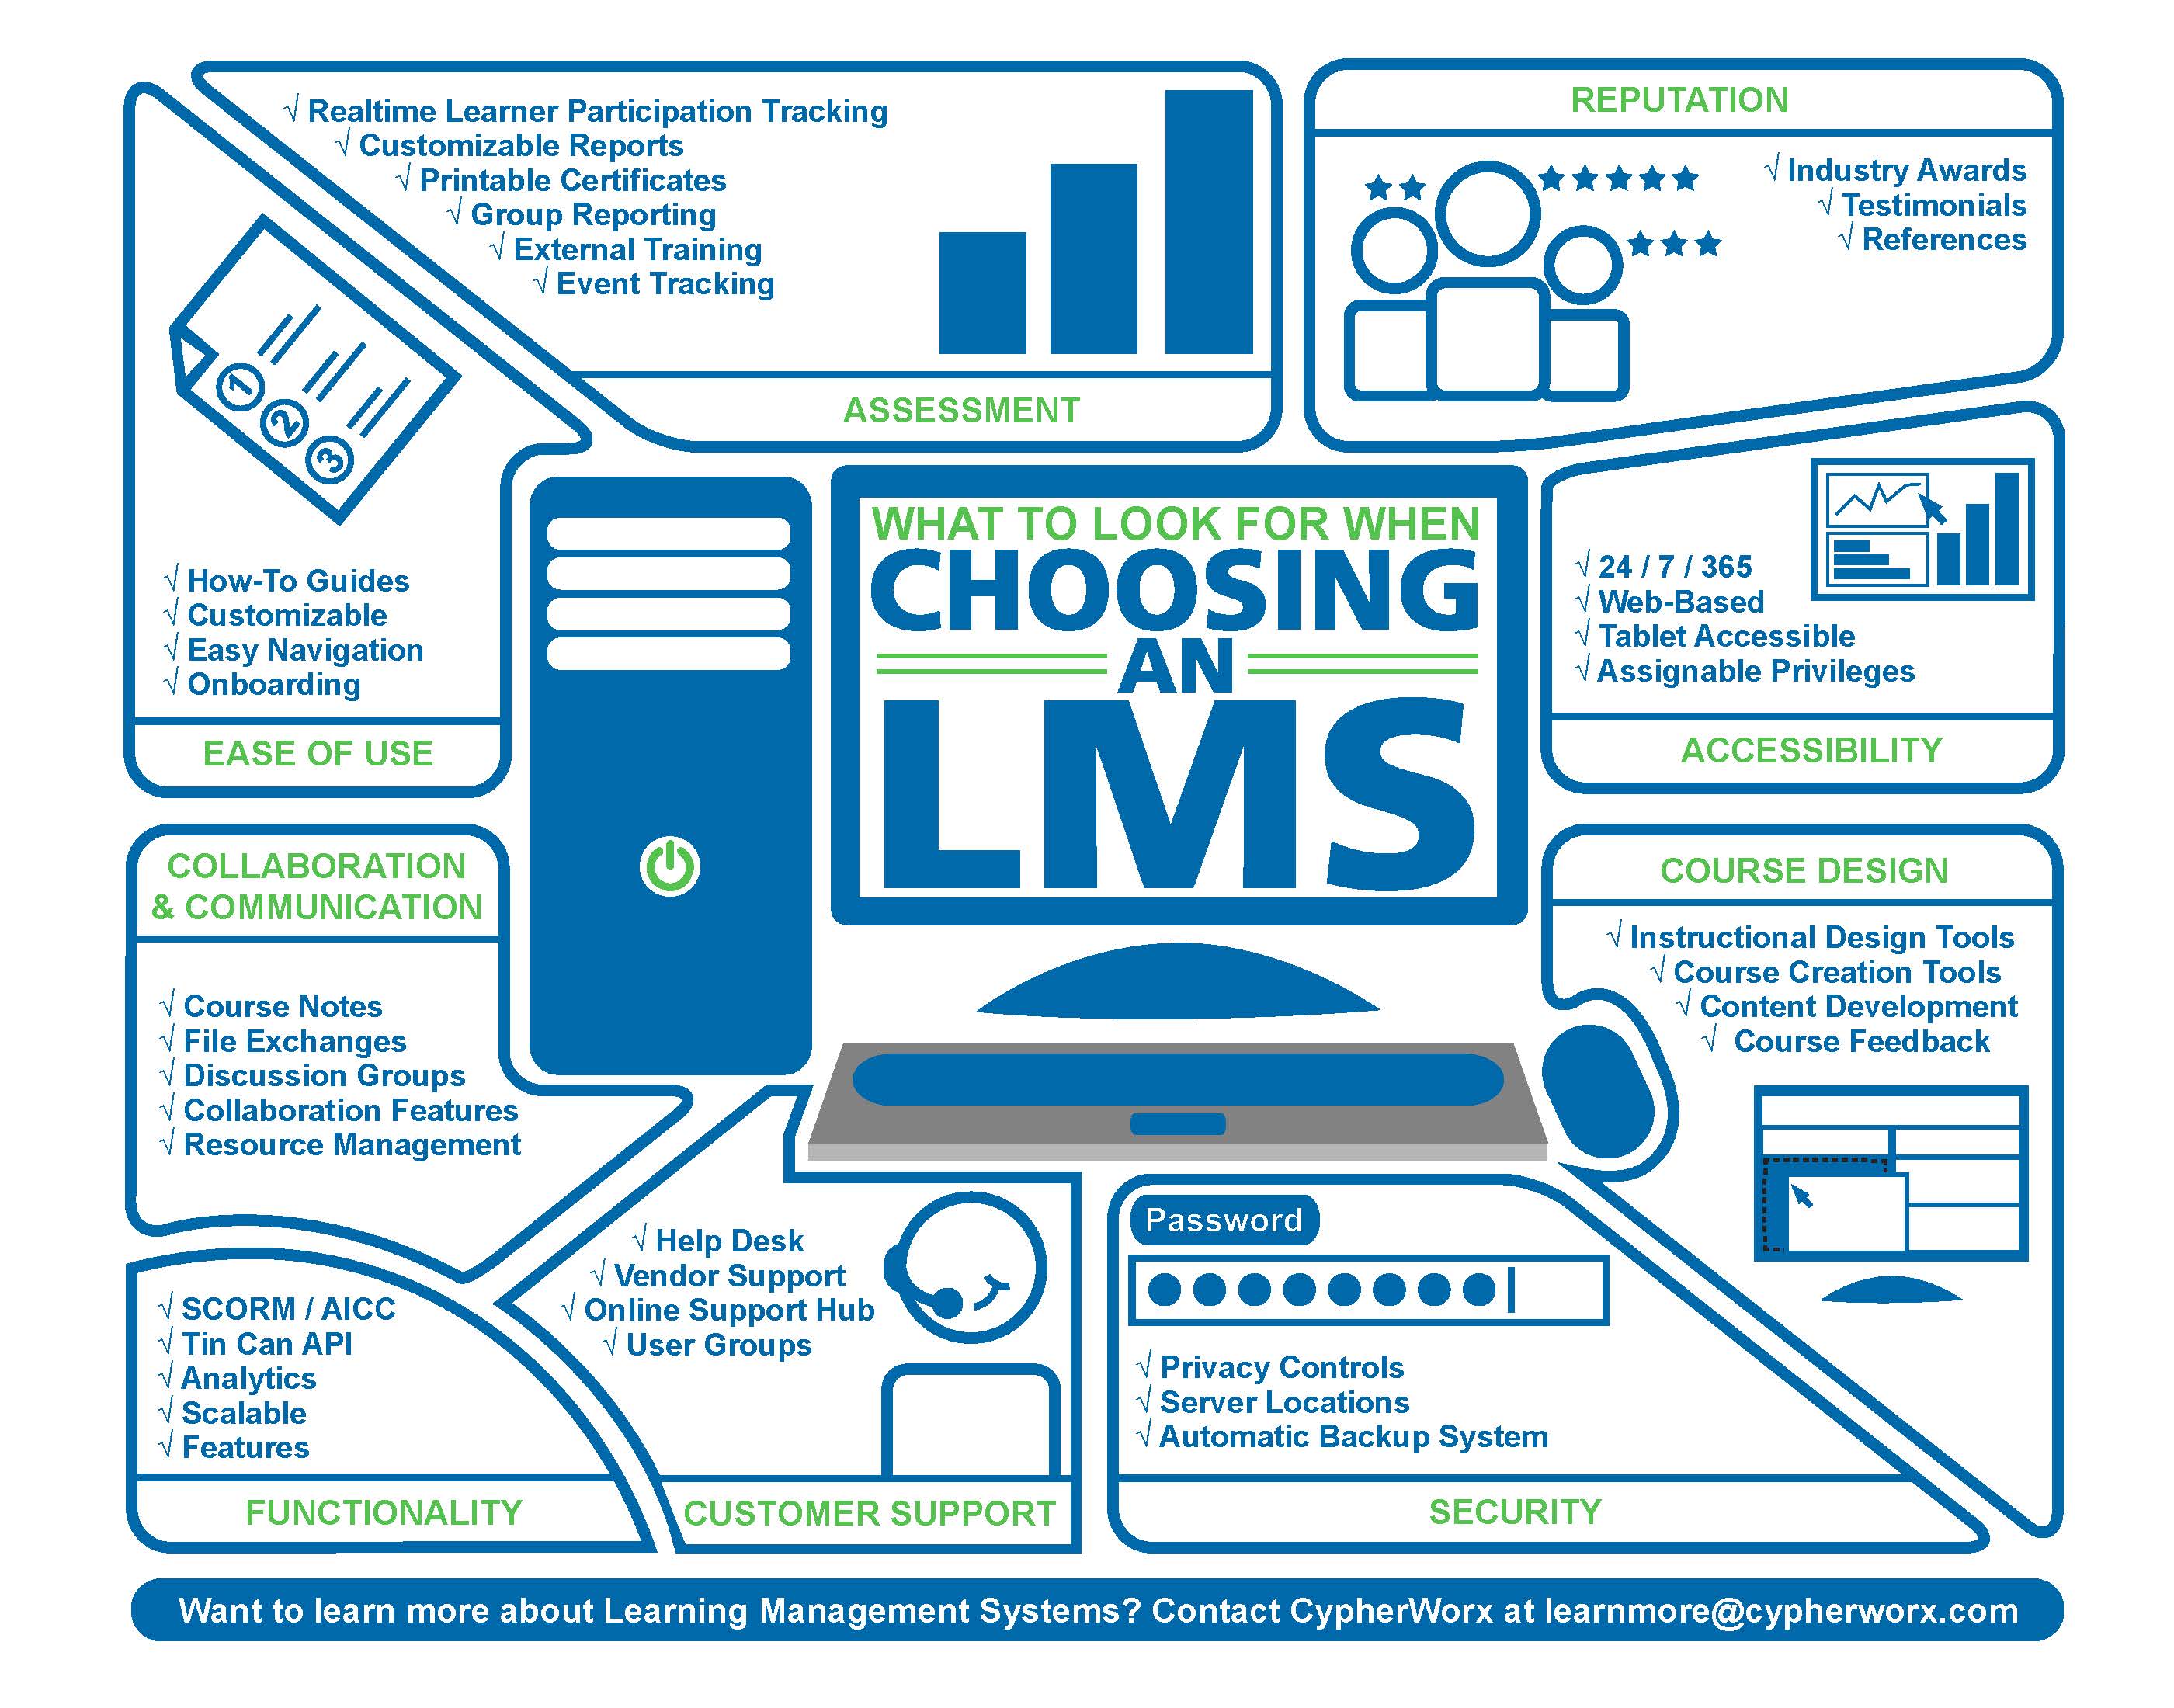 What To Look For When Choosing an LMS